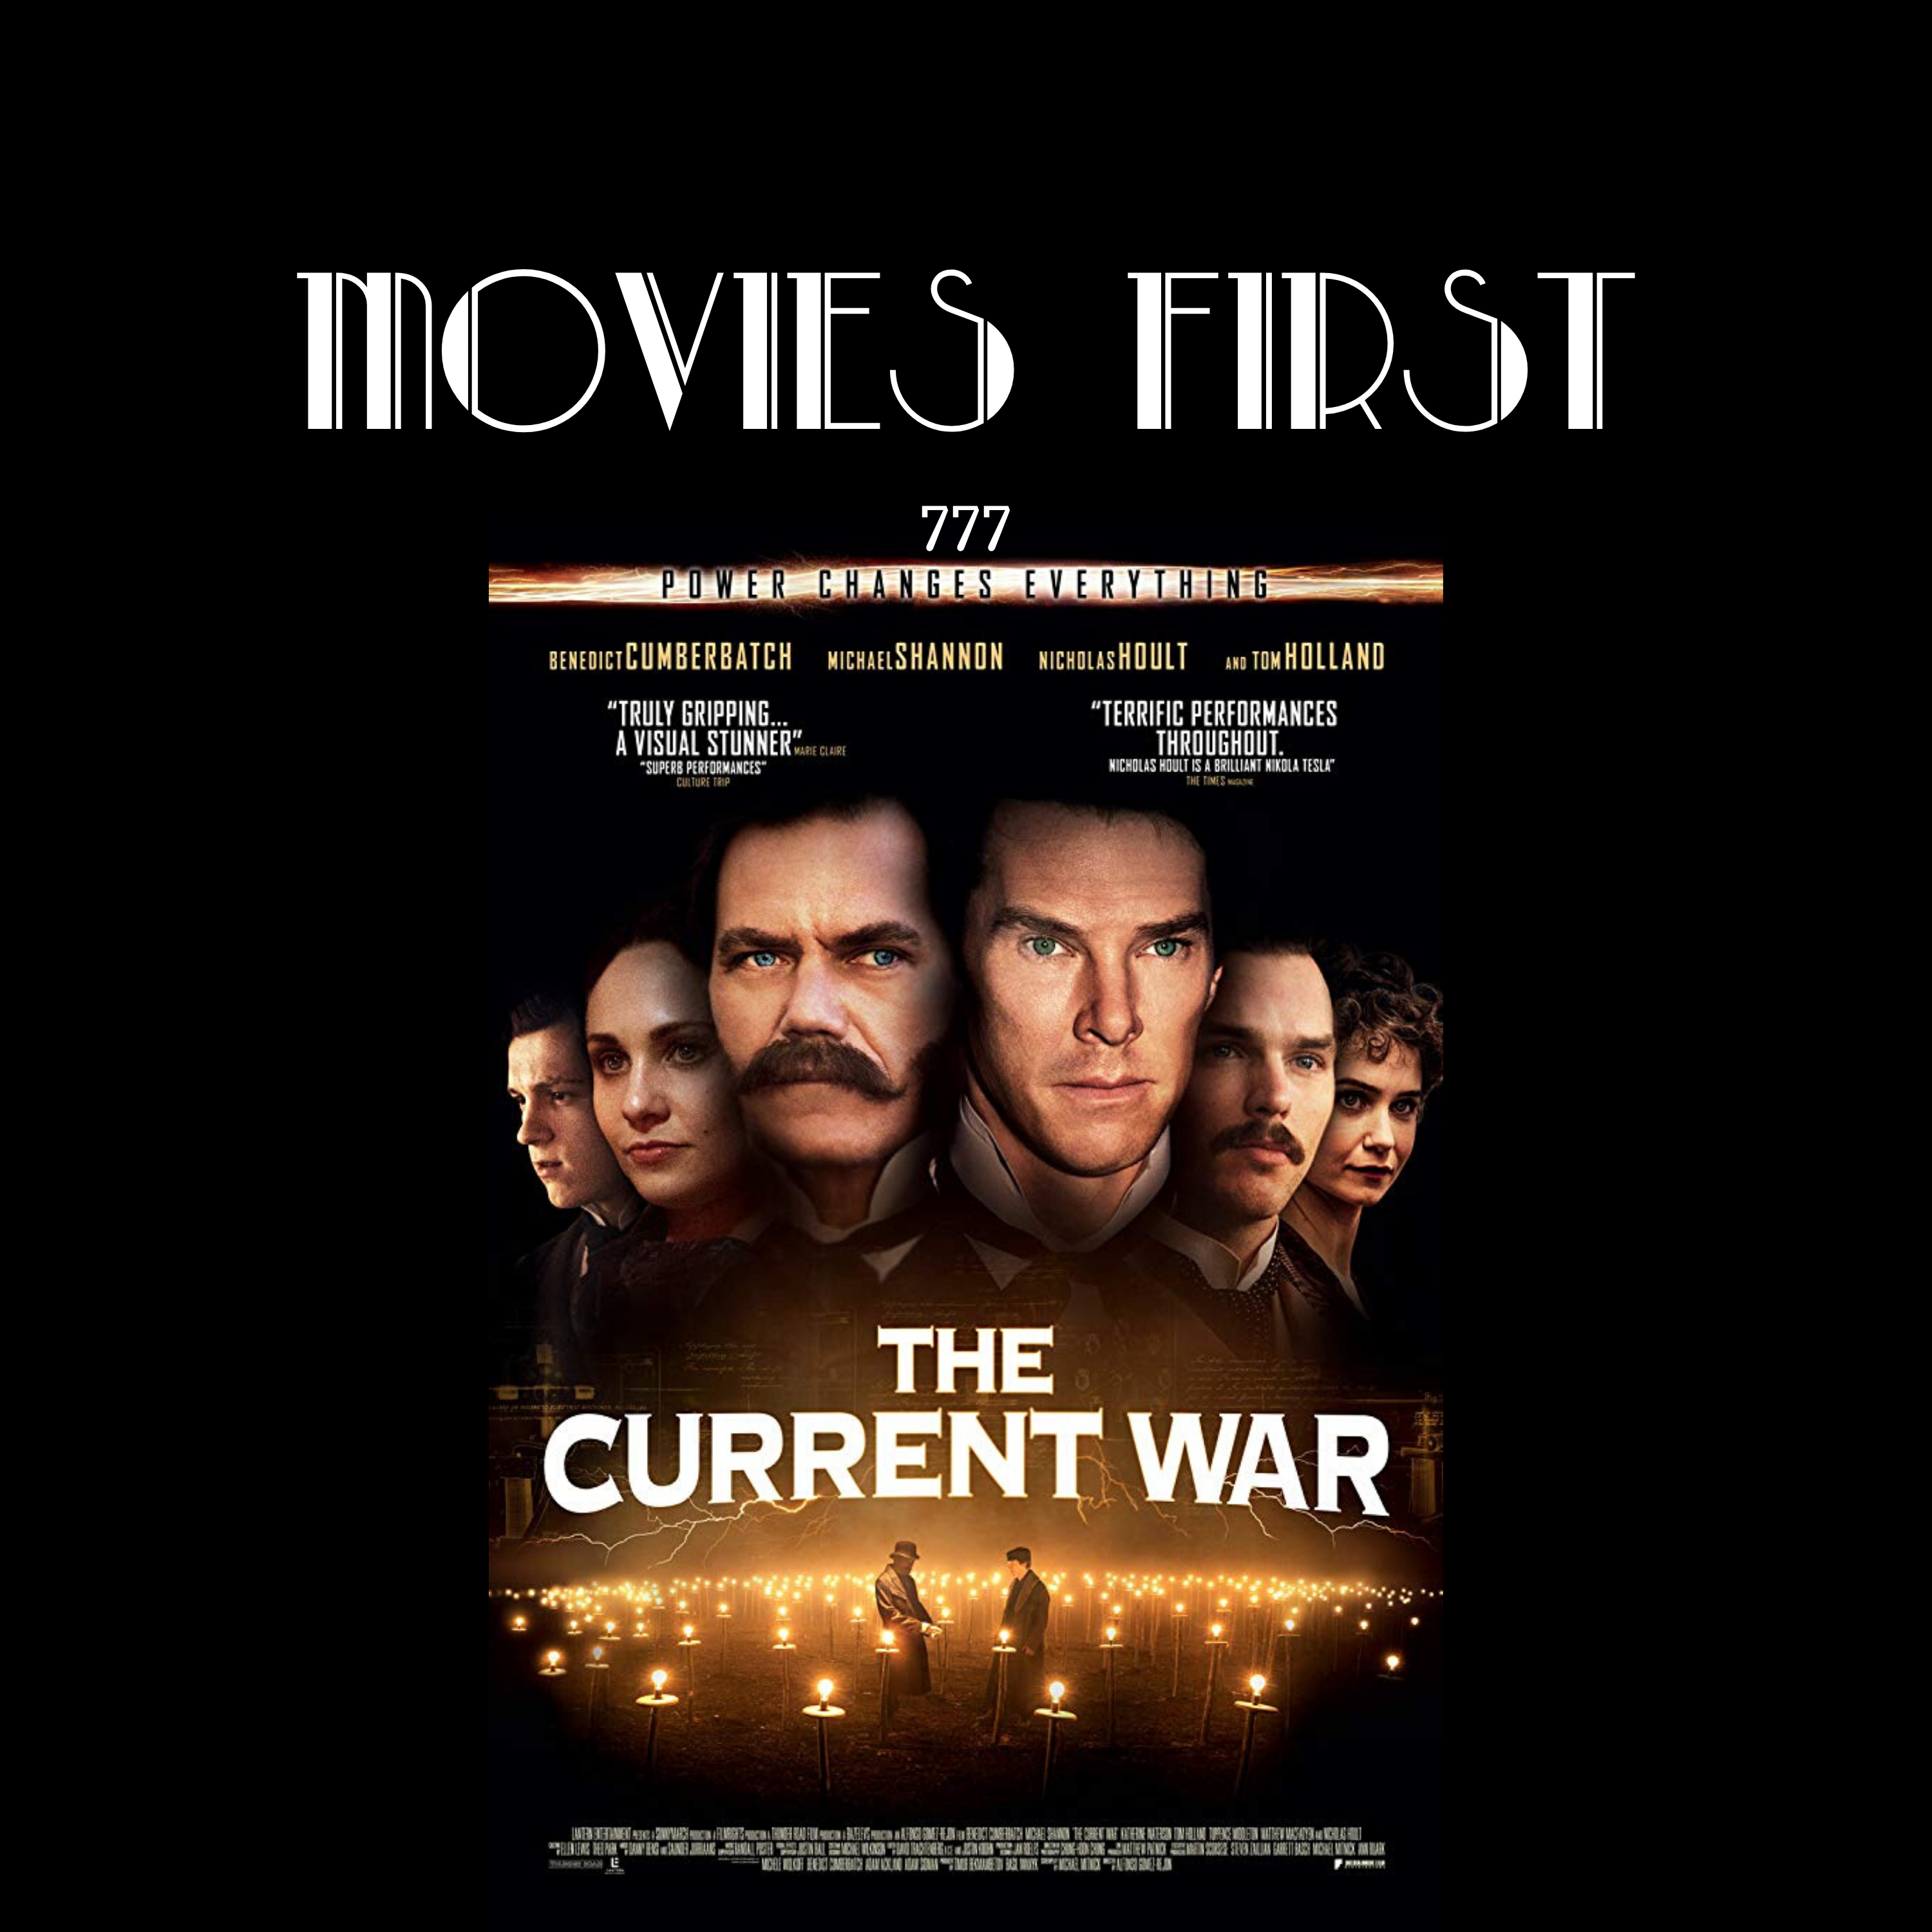 777: The Current War (Biography, Drama, History) (the @MoviesFirst review)